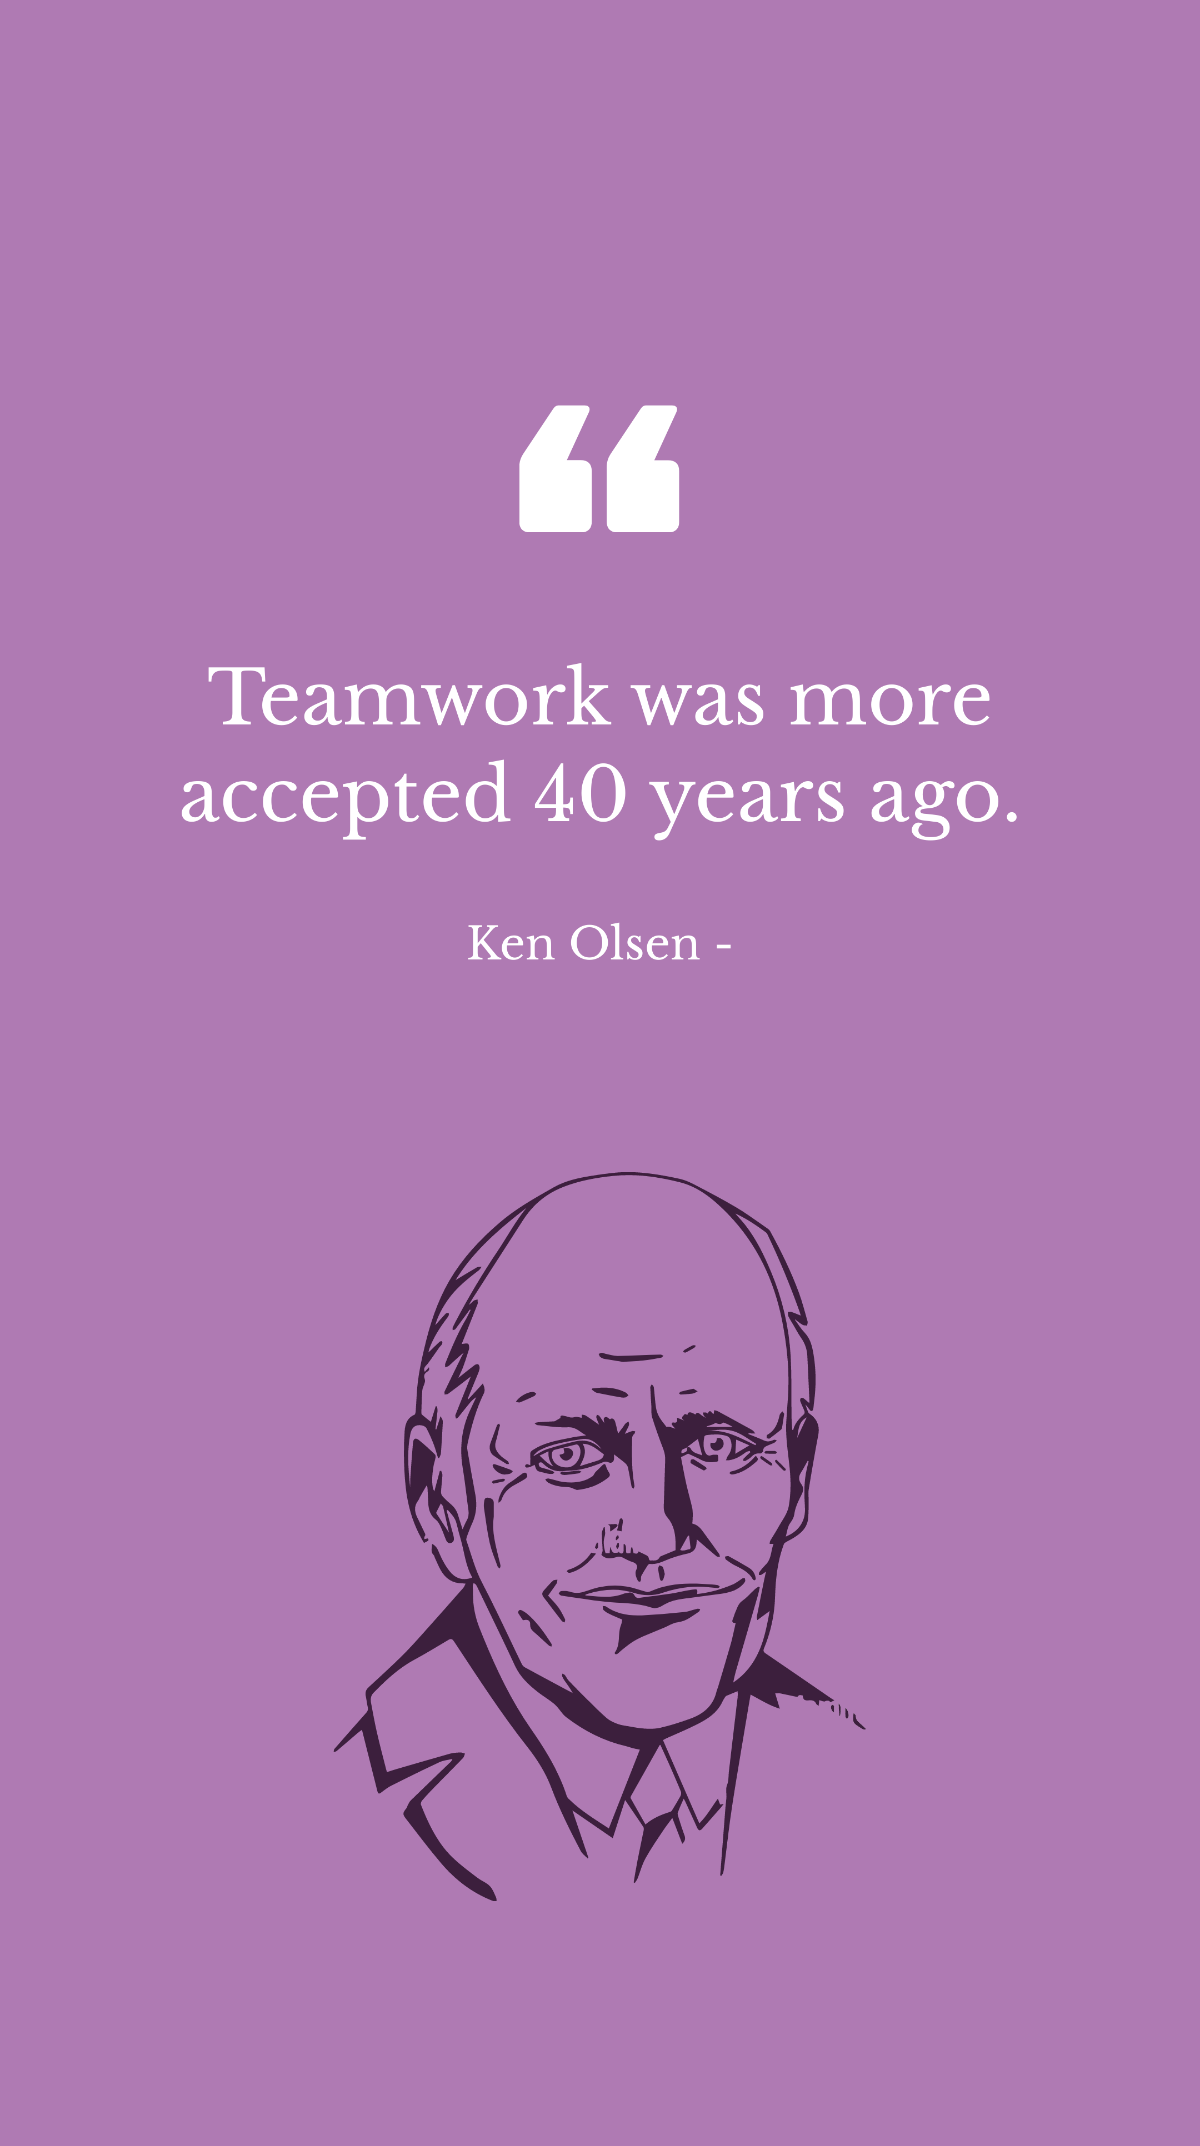 Ken Olsen - Teamwork was more accepted 40 years ago. Template